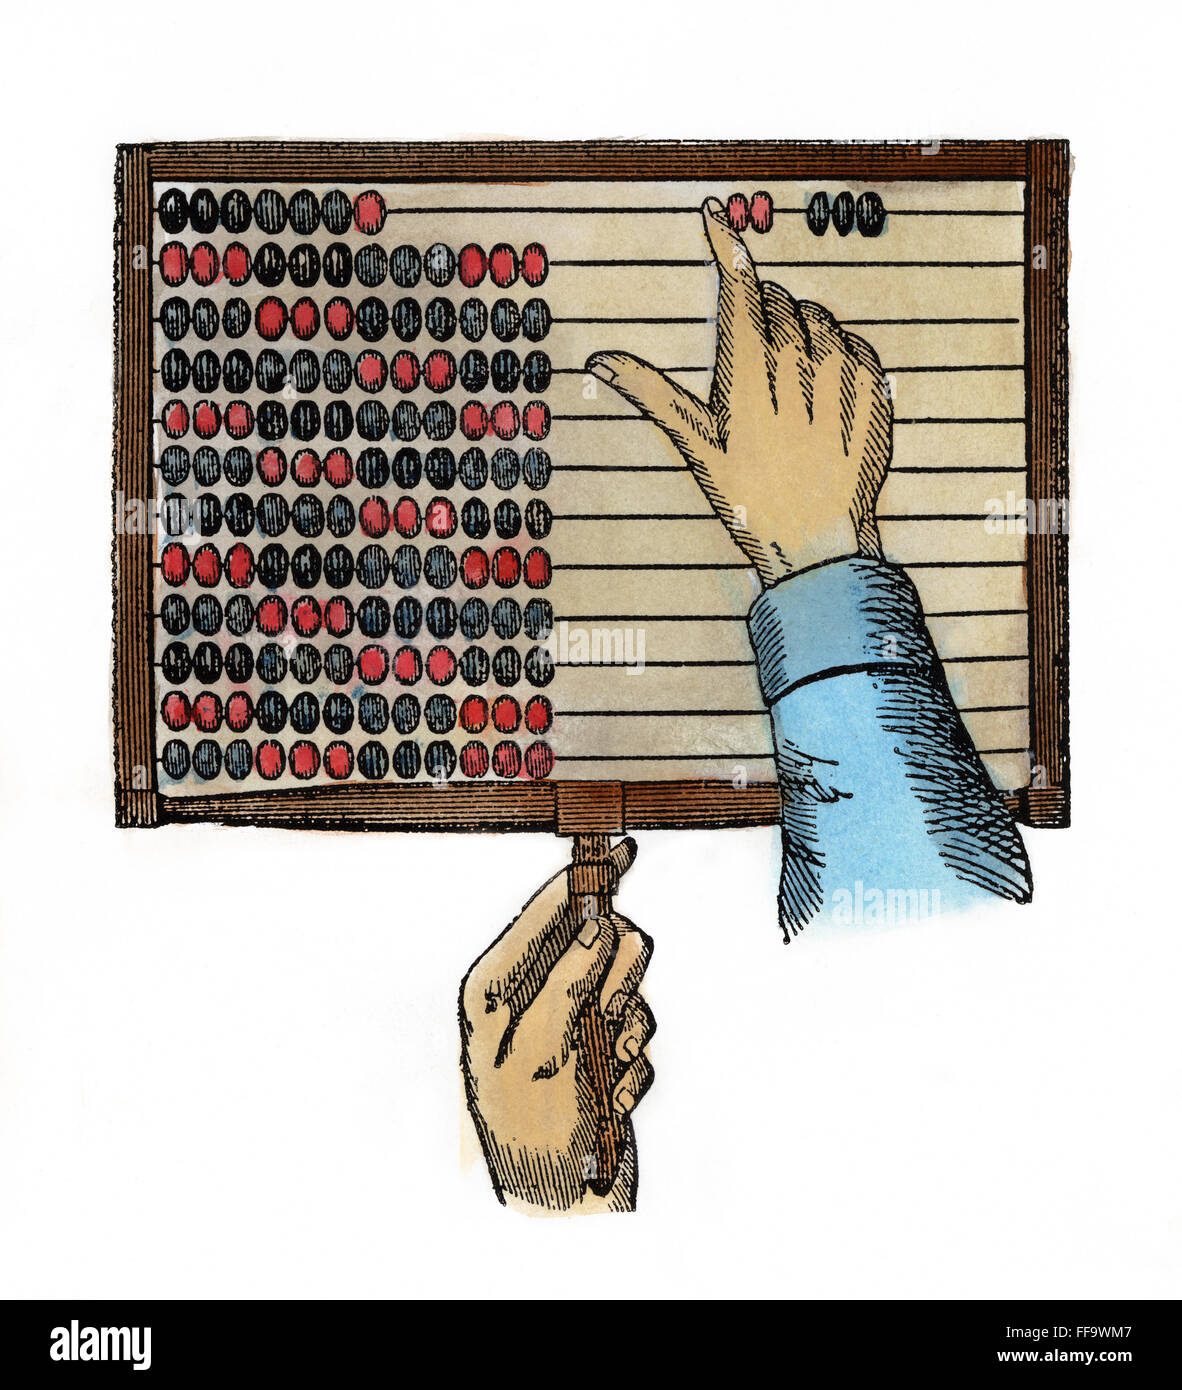 ABACUS, 19th CENTURY. /nLine engraving. Stock Photo